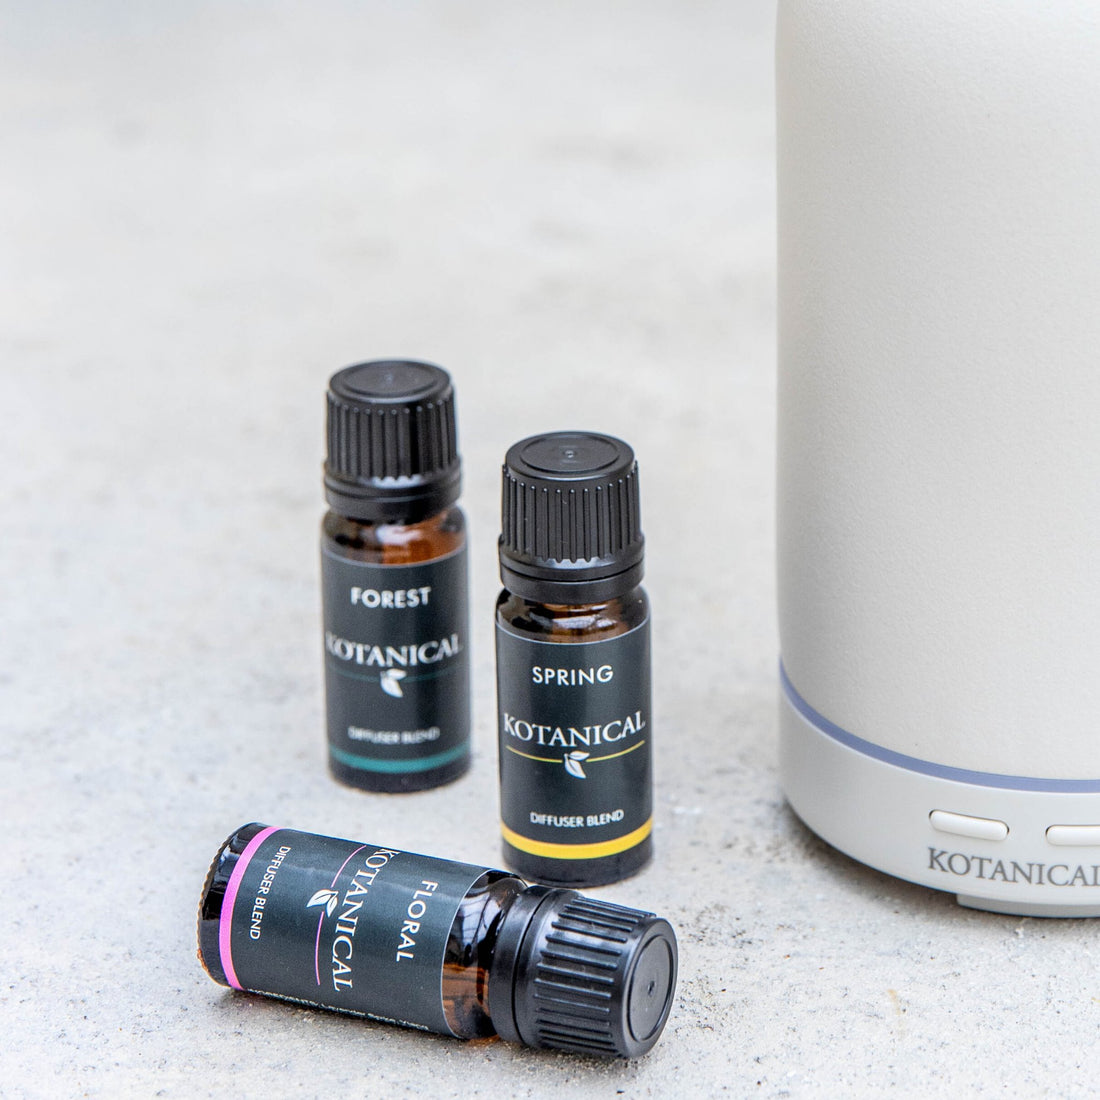 Diffuser Blends: What Essential Oils Work Together?